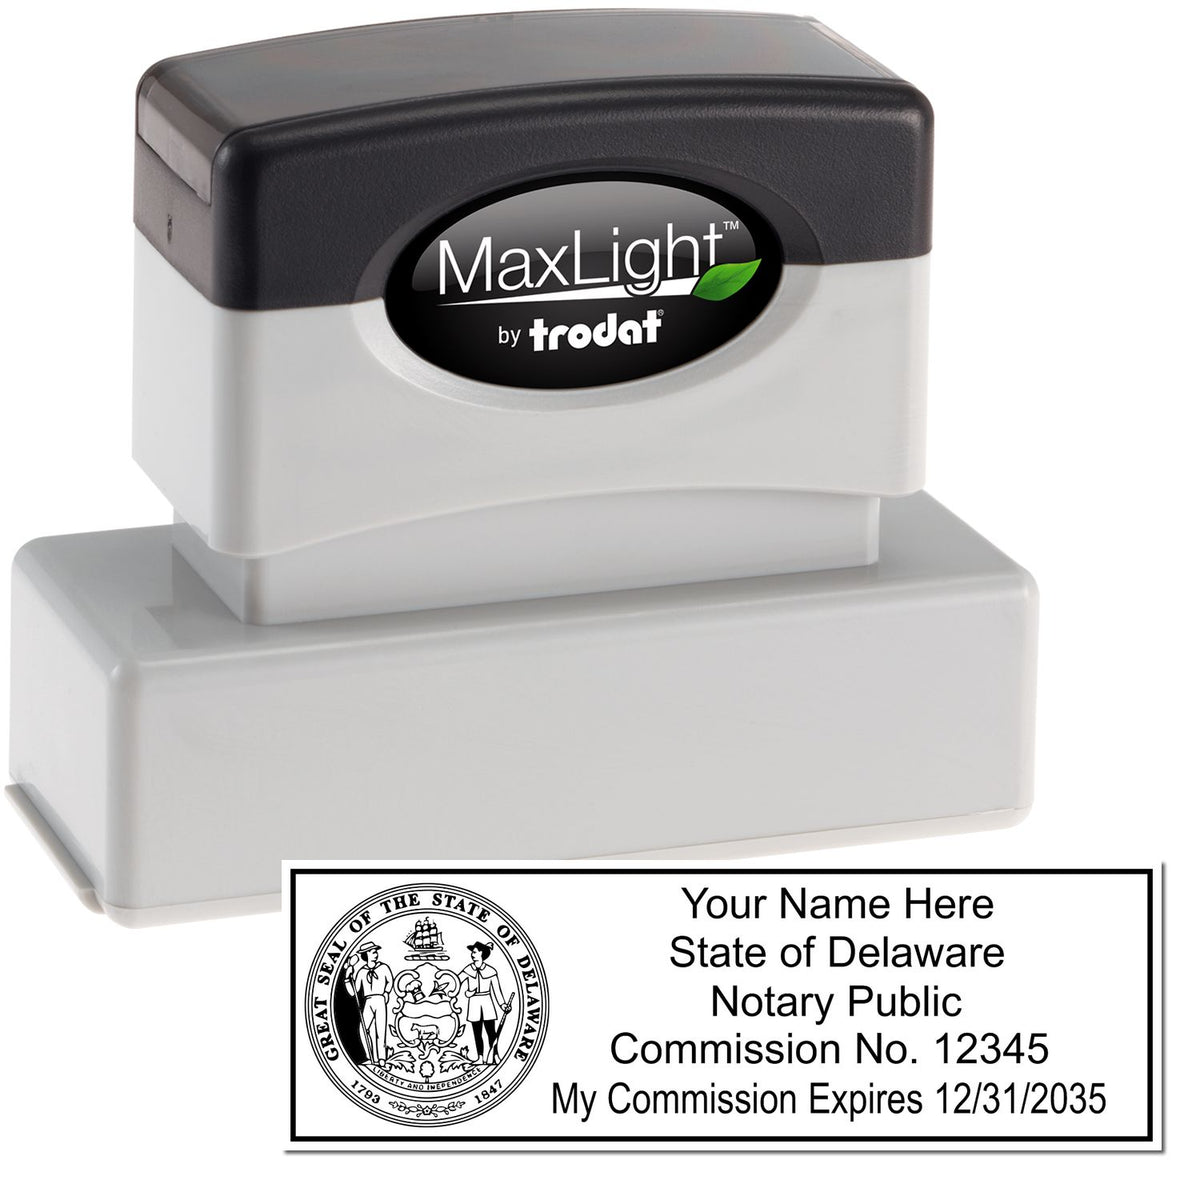 The main image for the MaxLight Premium Pre-Inked Delaware State Seal Notarial Stamp depicting a sample of the imprint and electronic files